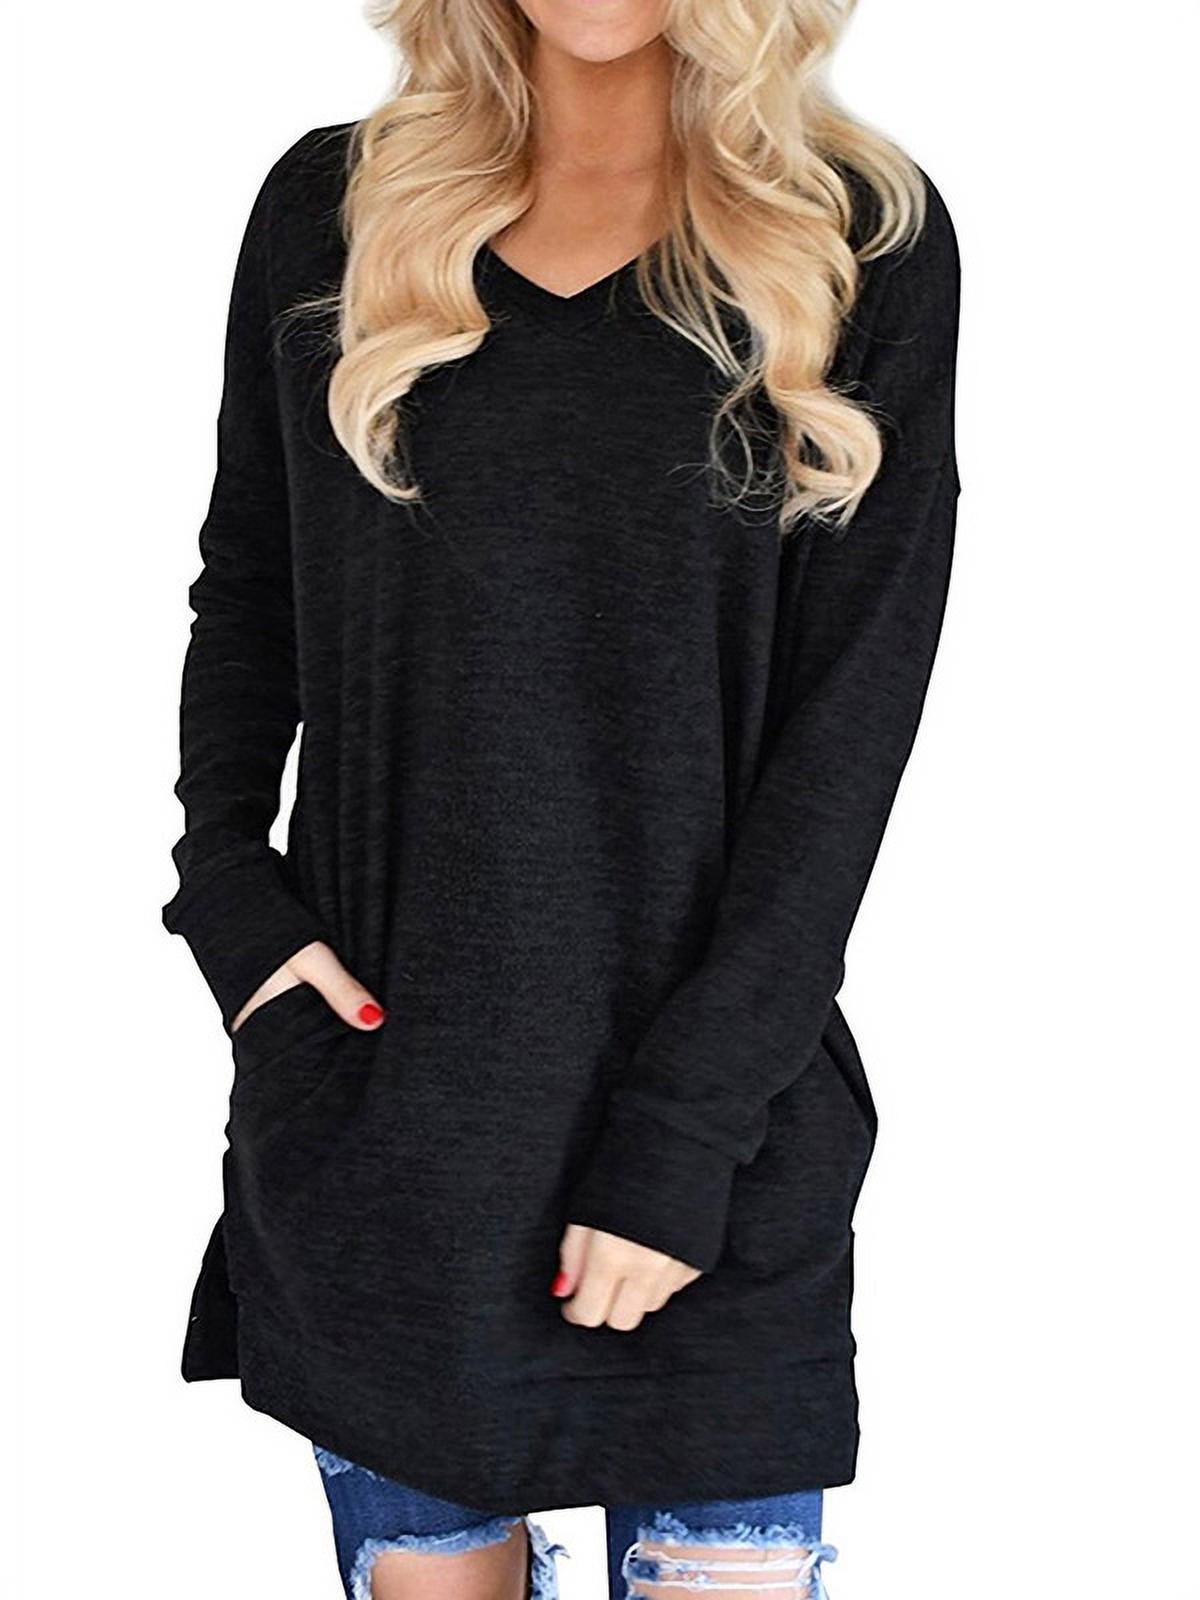 Women V-Neck Long Sleeves Pure Color Pocket Top - image 1 of 6